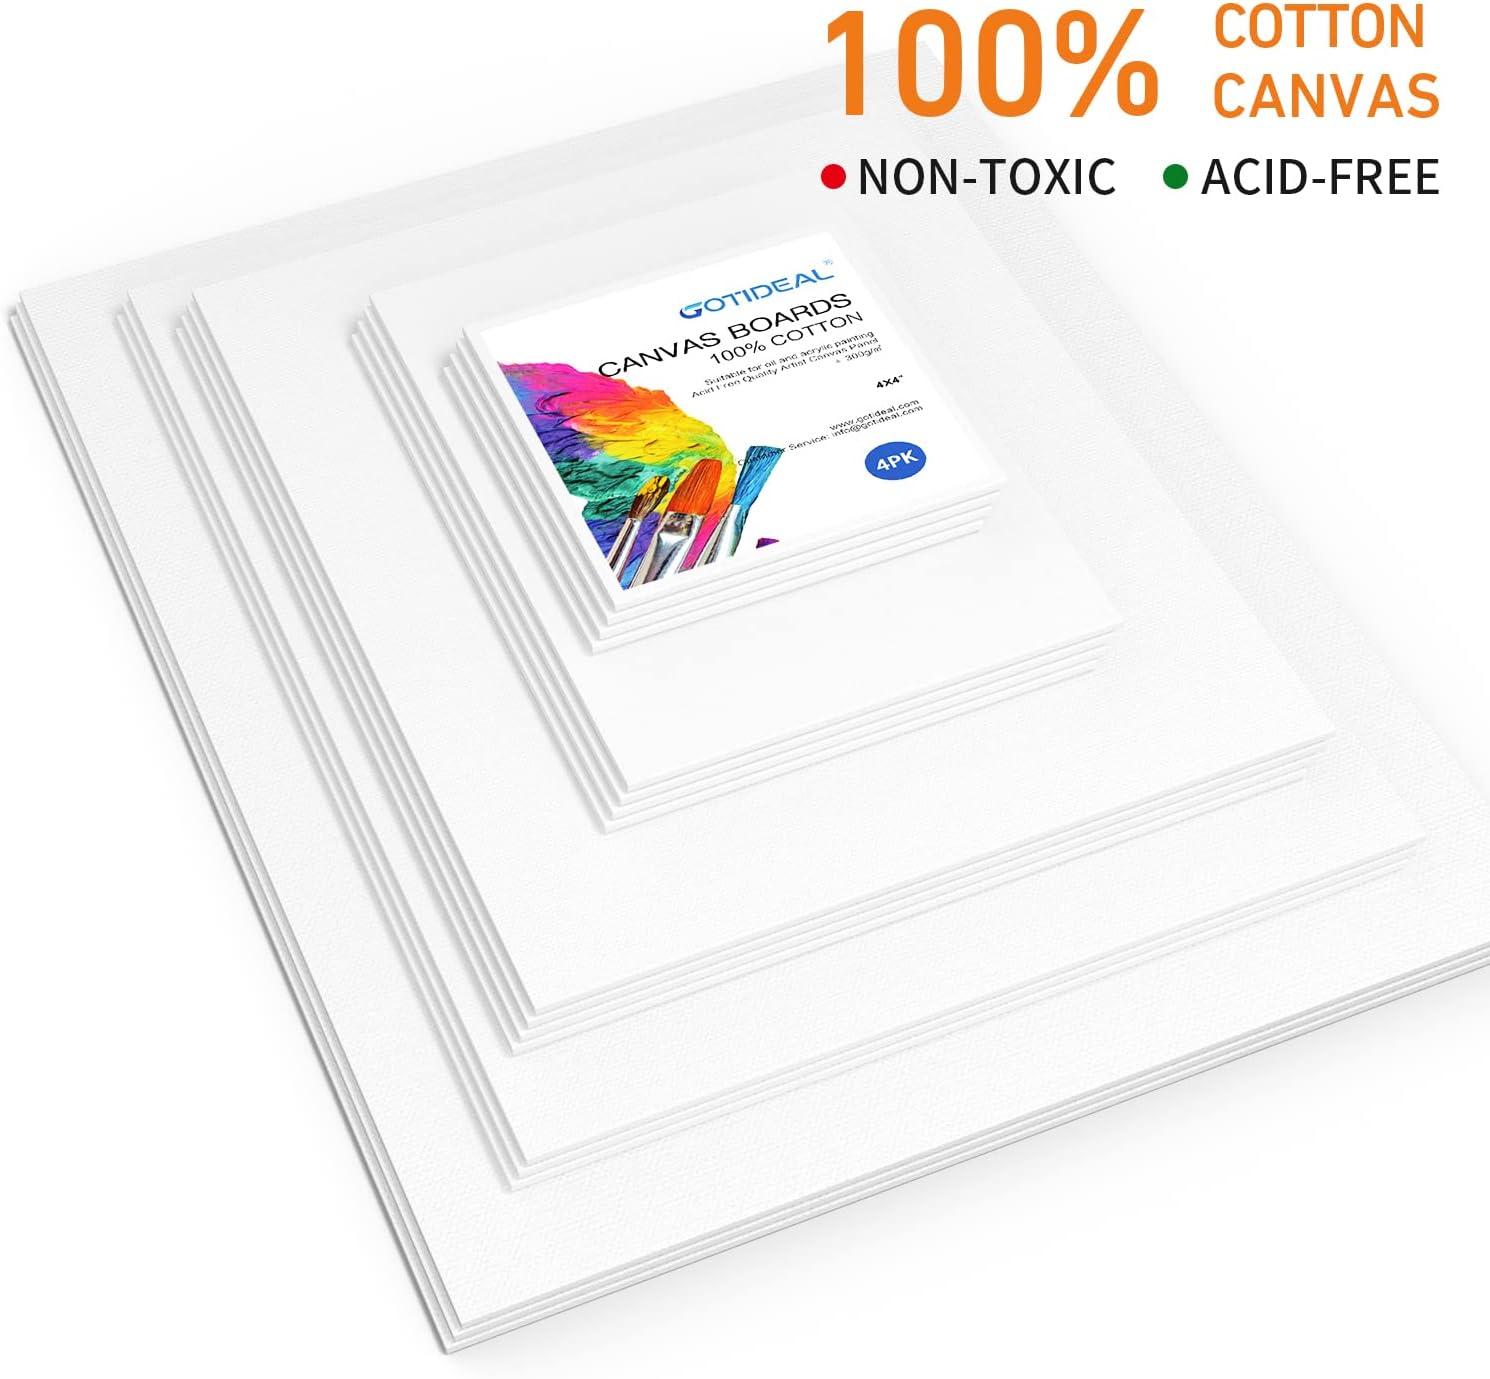 Crafts 4 All Canvases for Painting - Blank Canvas Boards, Triple Primed 100% Cotton Canvas Panels for Acrylic, Oil & Watercolor Paint | Bulk Art